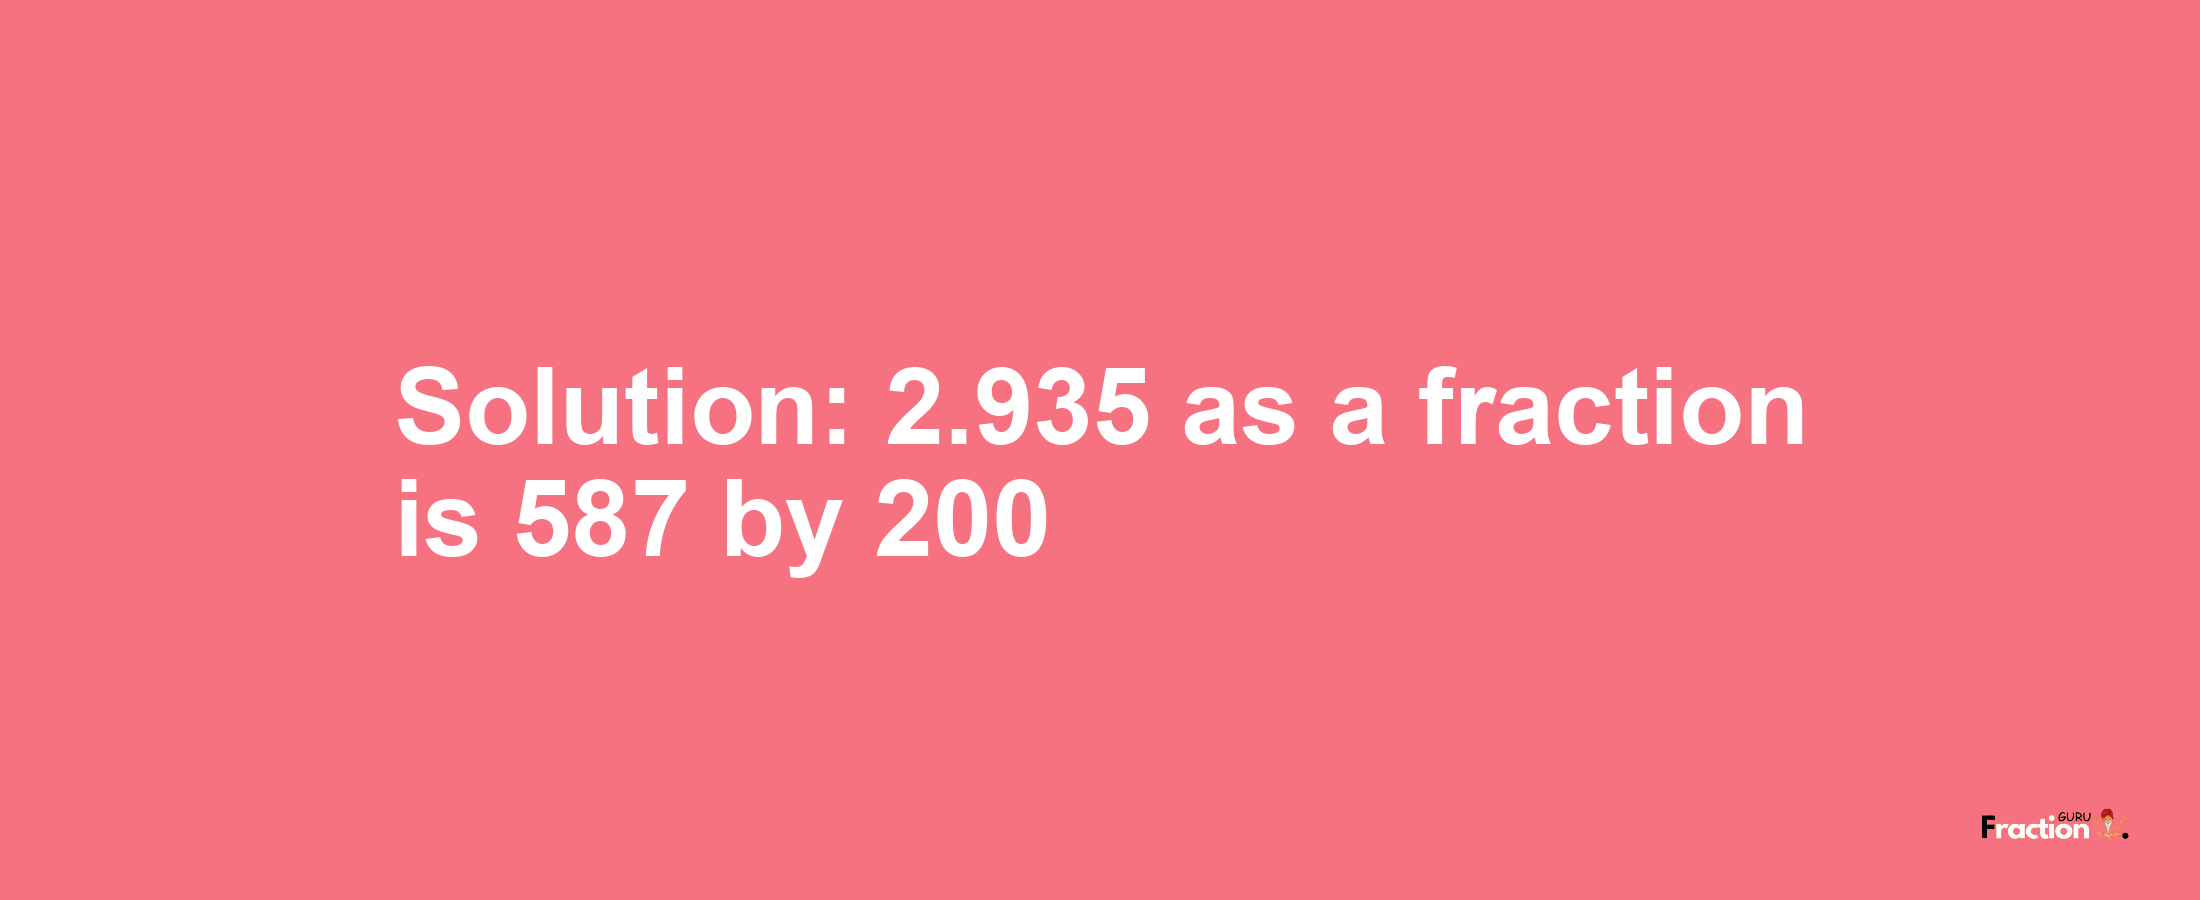 Solution:2.935 as a fraction is 587/200